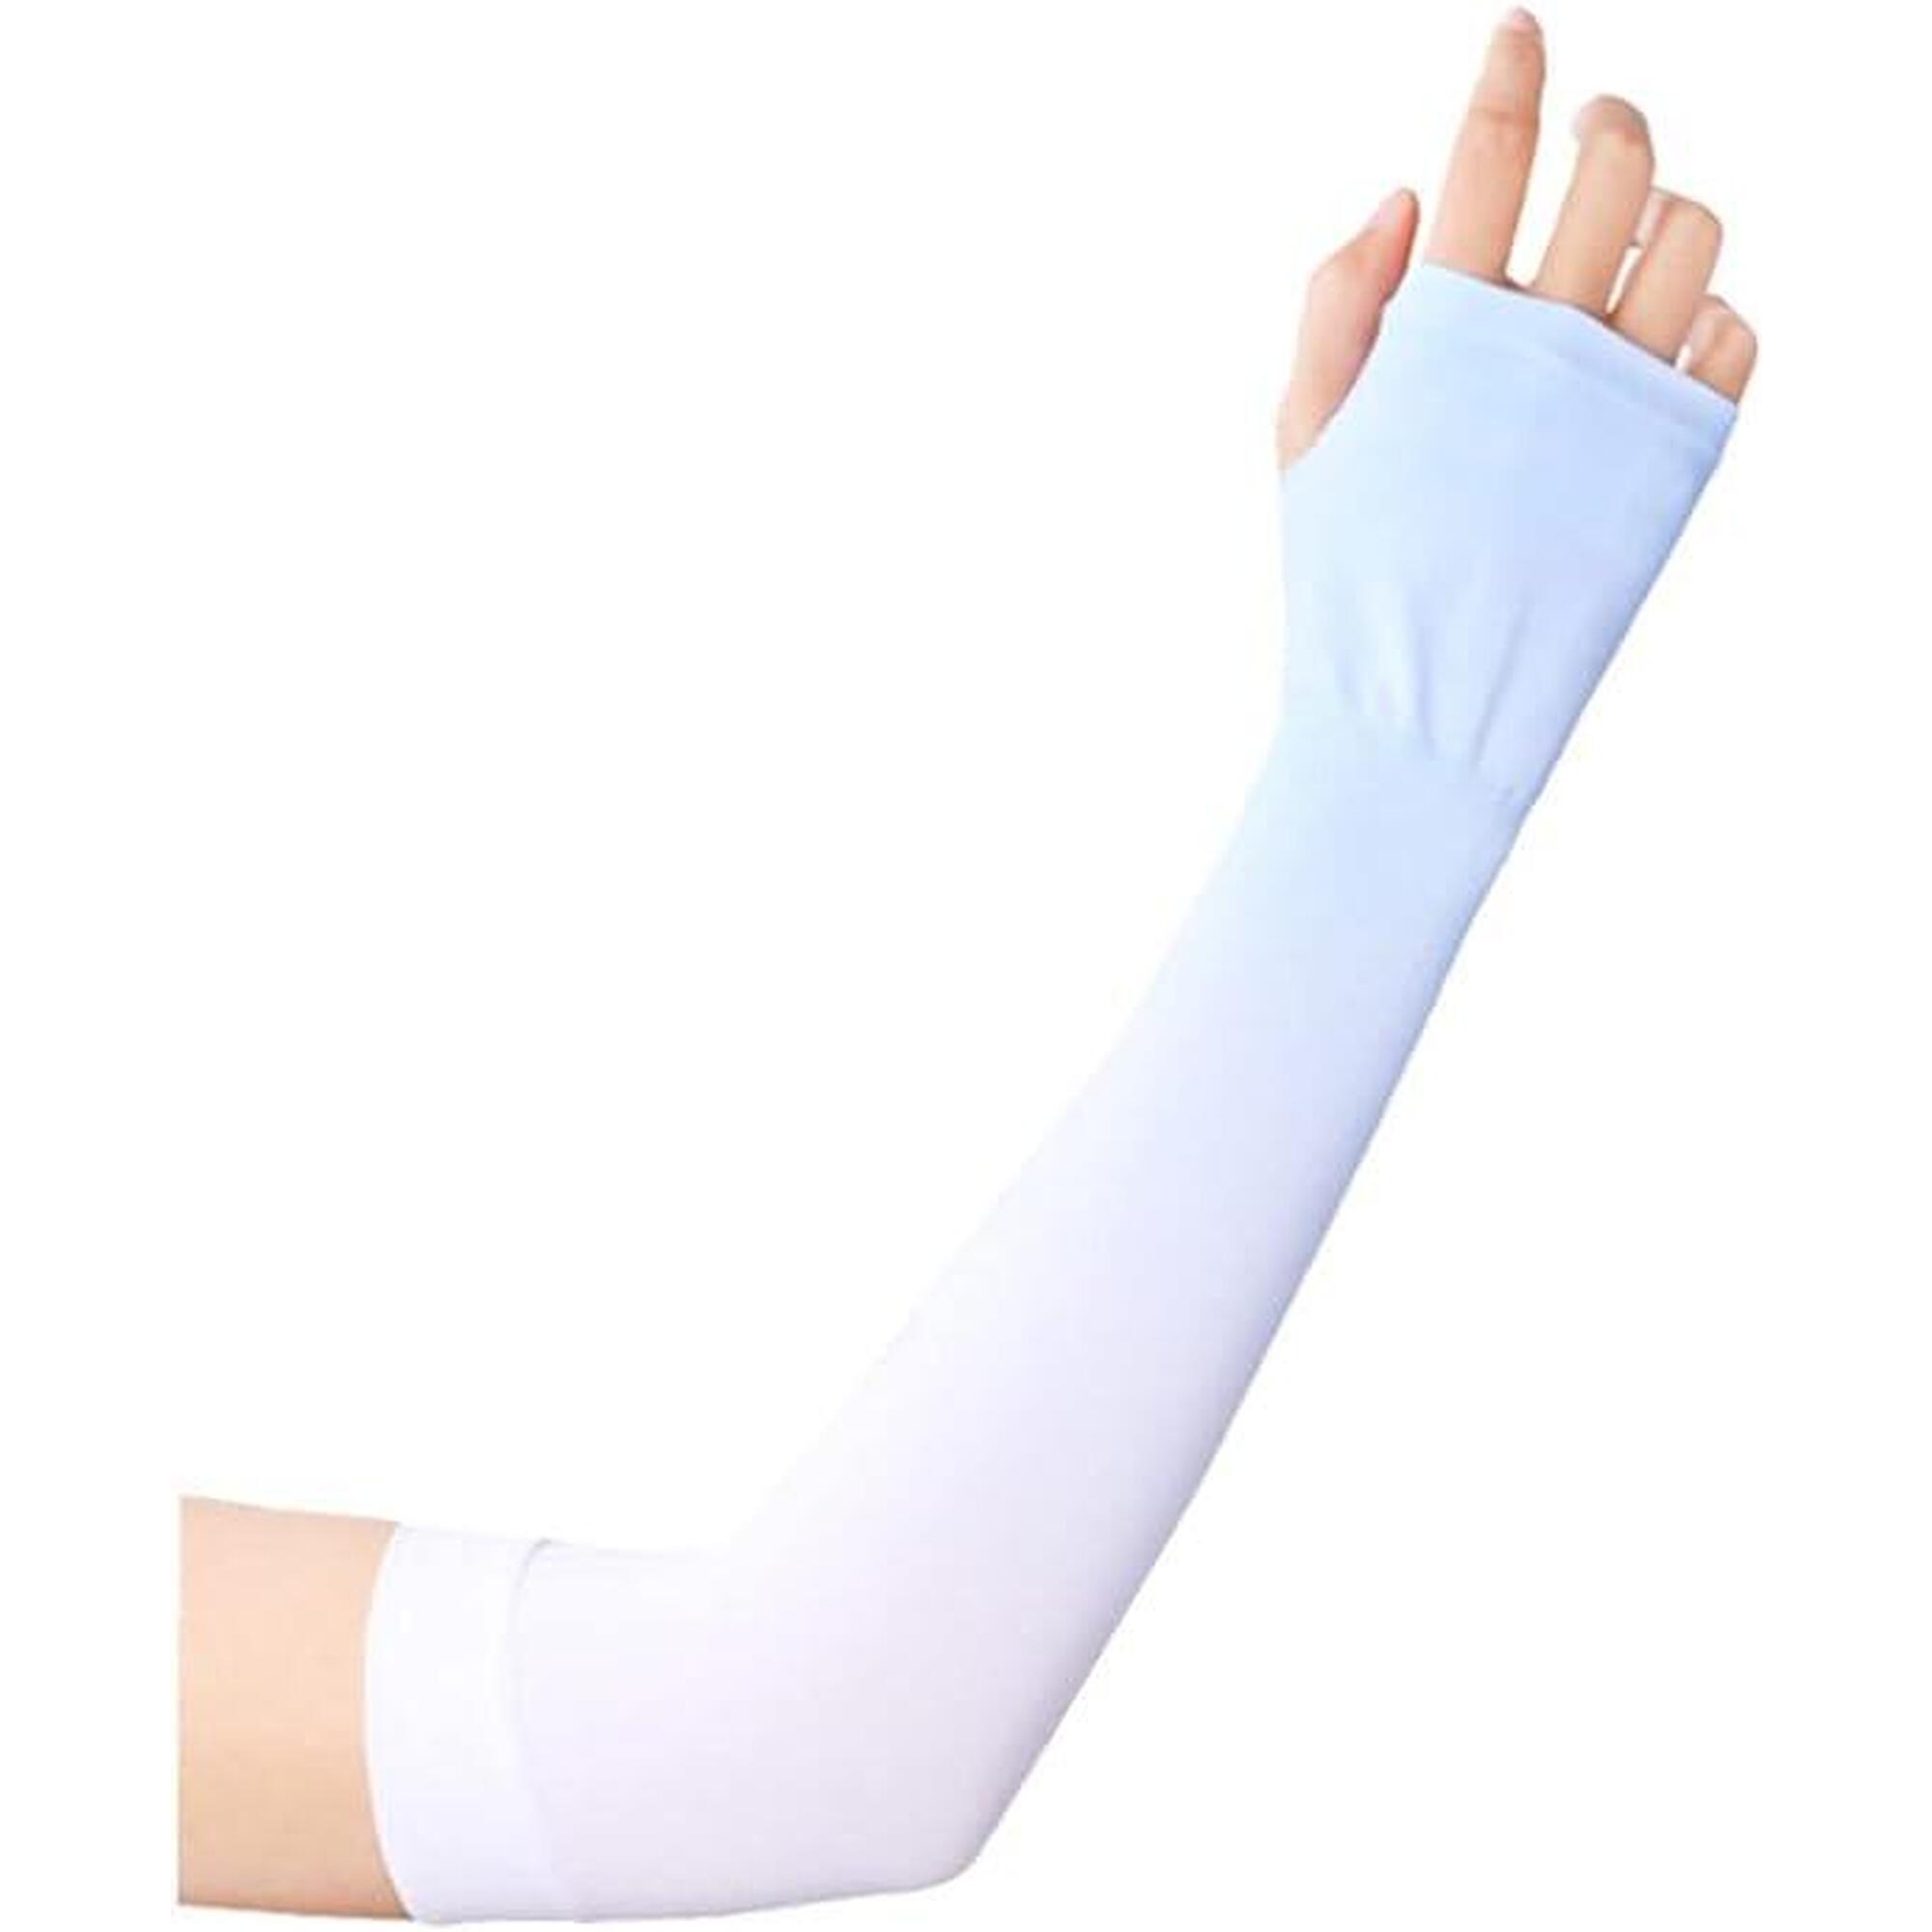 MATATA UV Protection Cooling Arm Sleeve - Pink